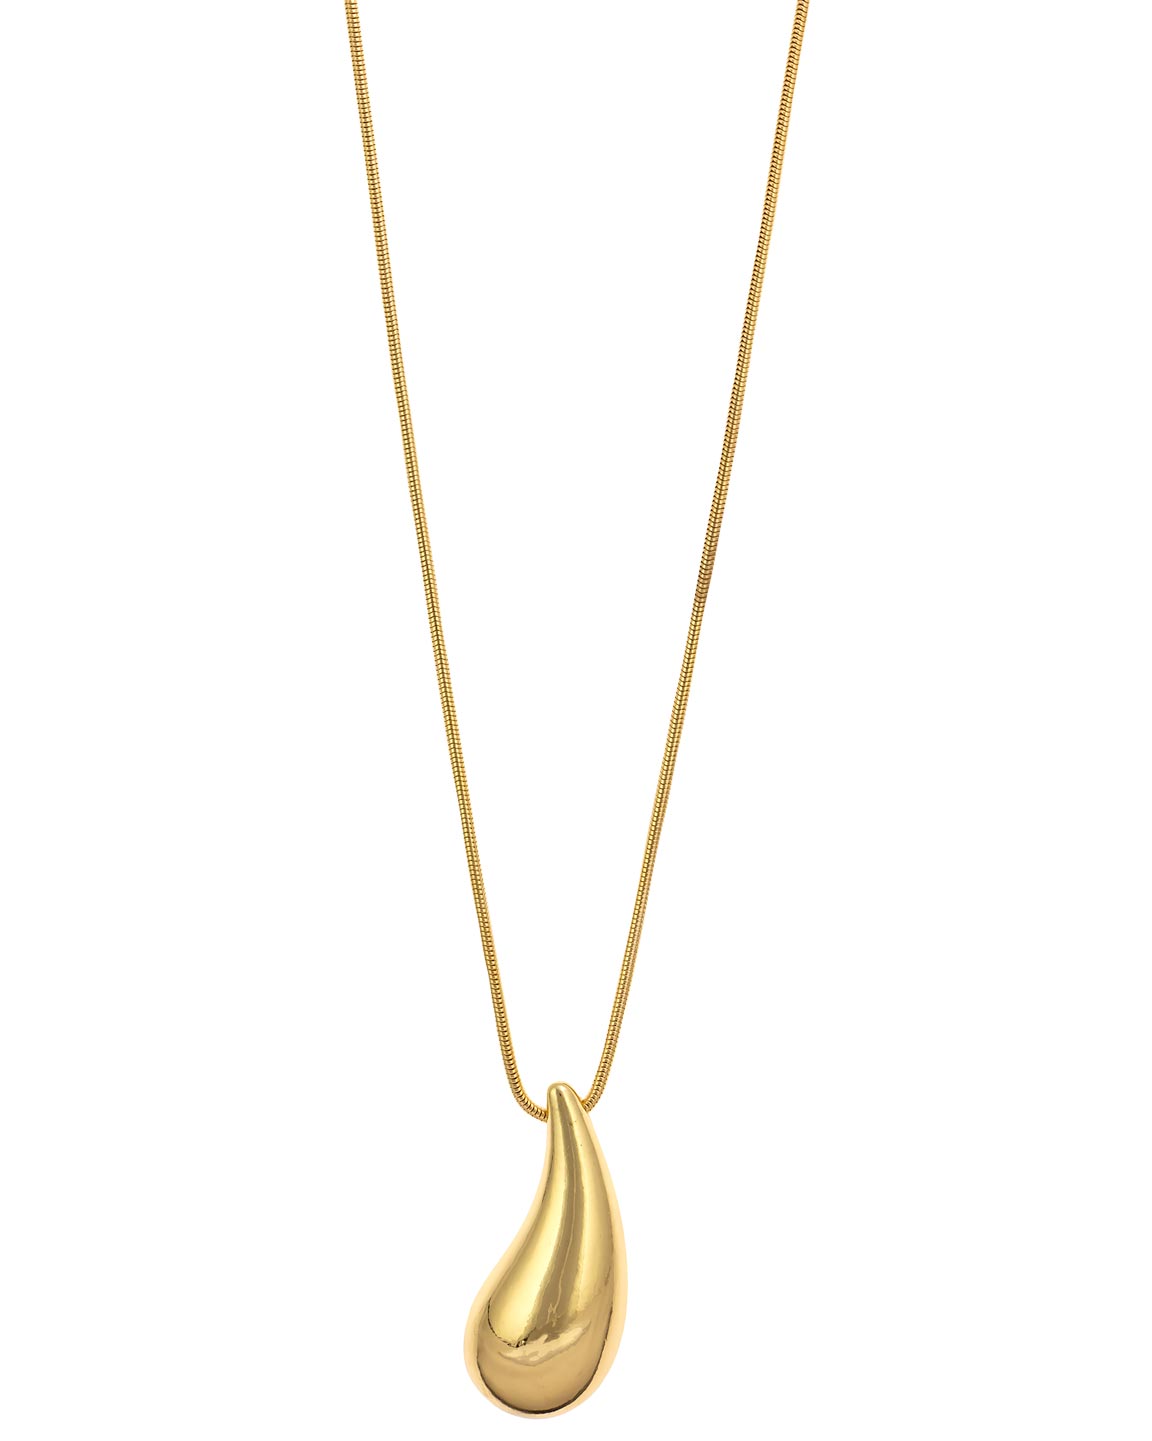 Dauplaise Jewelry - Sculpted Drop Necklace